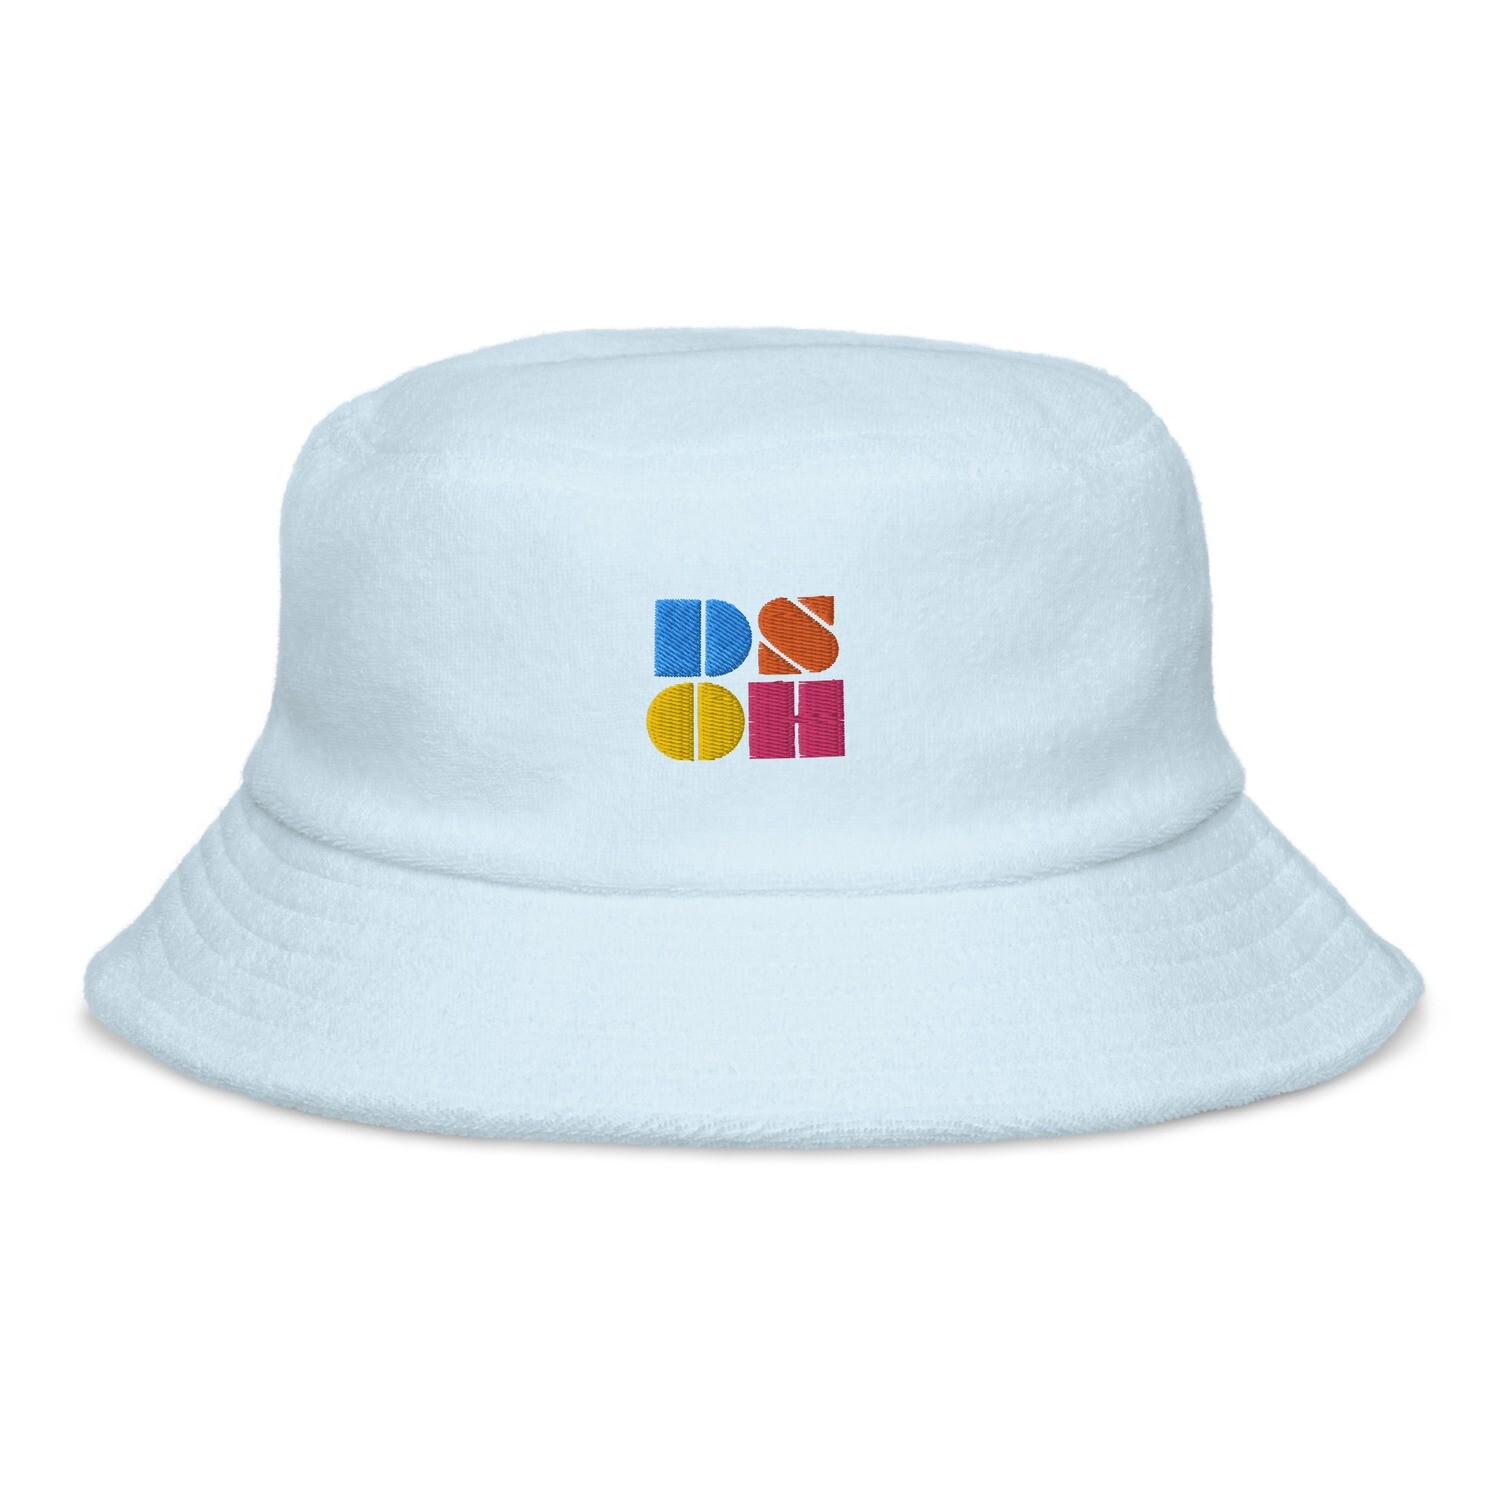 DSOH embroidered Terry cloth bucket hat